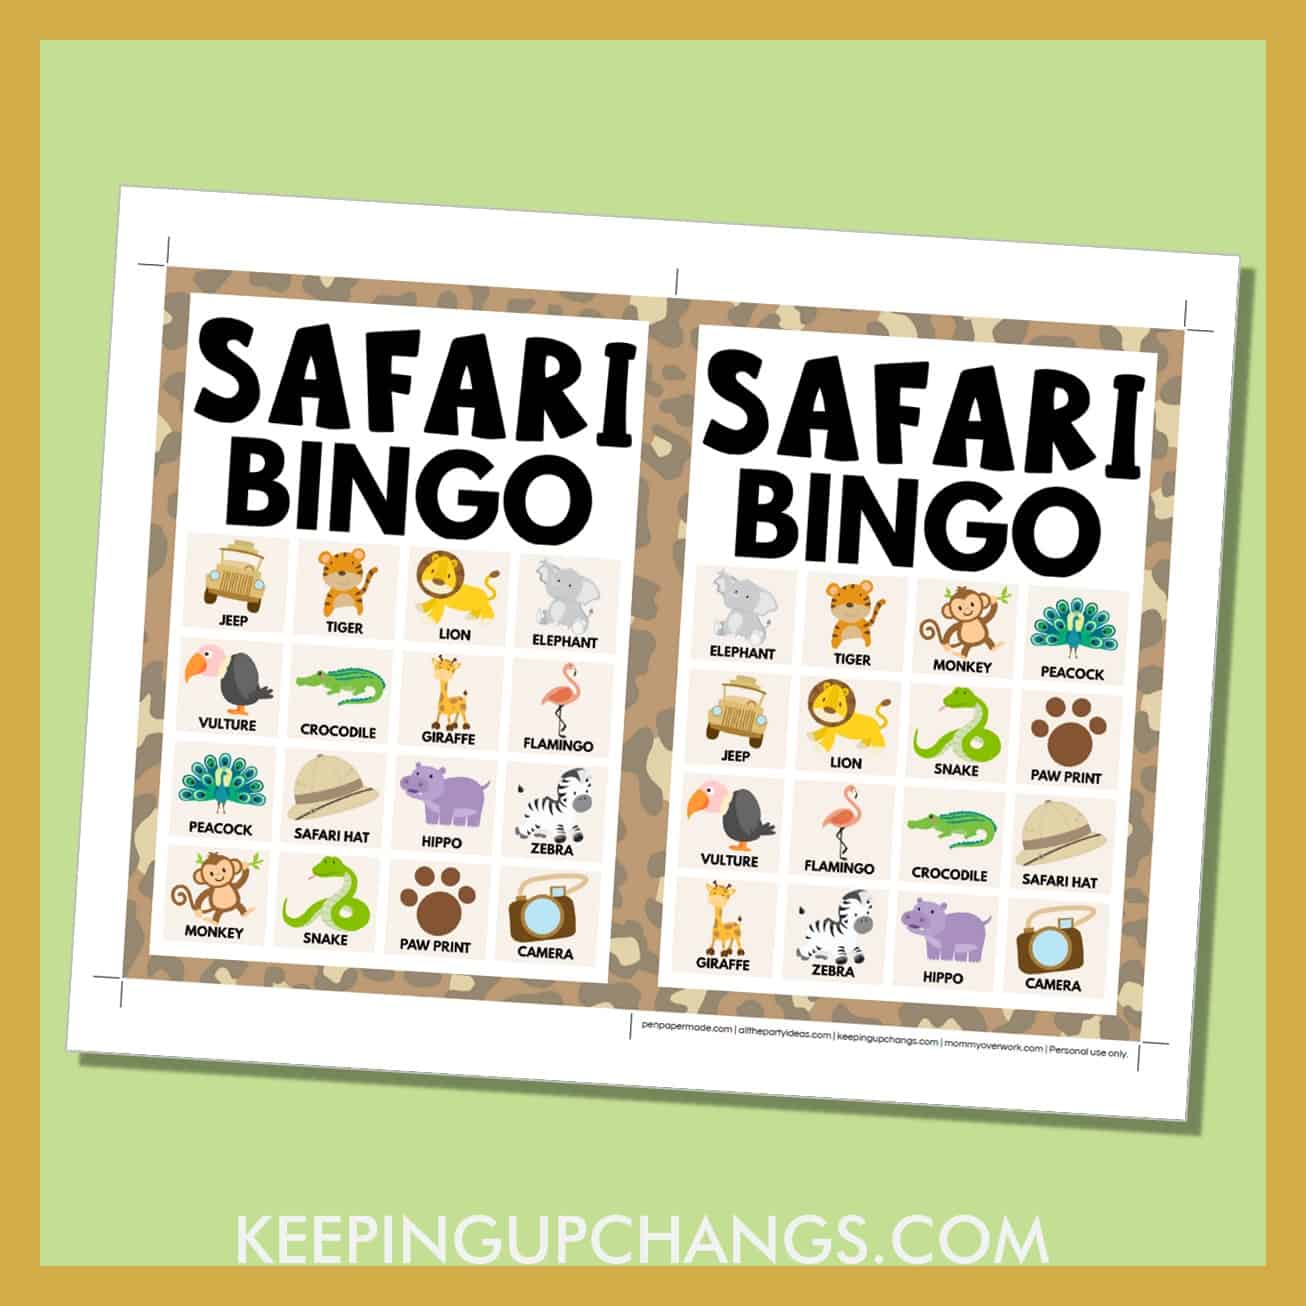 free safari bingo card 4x4 5x7 game boards with images and text words.